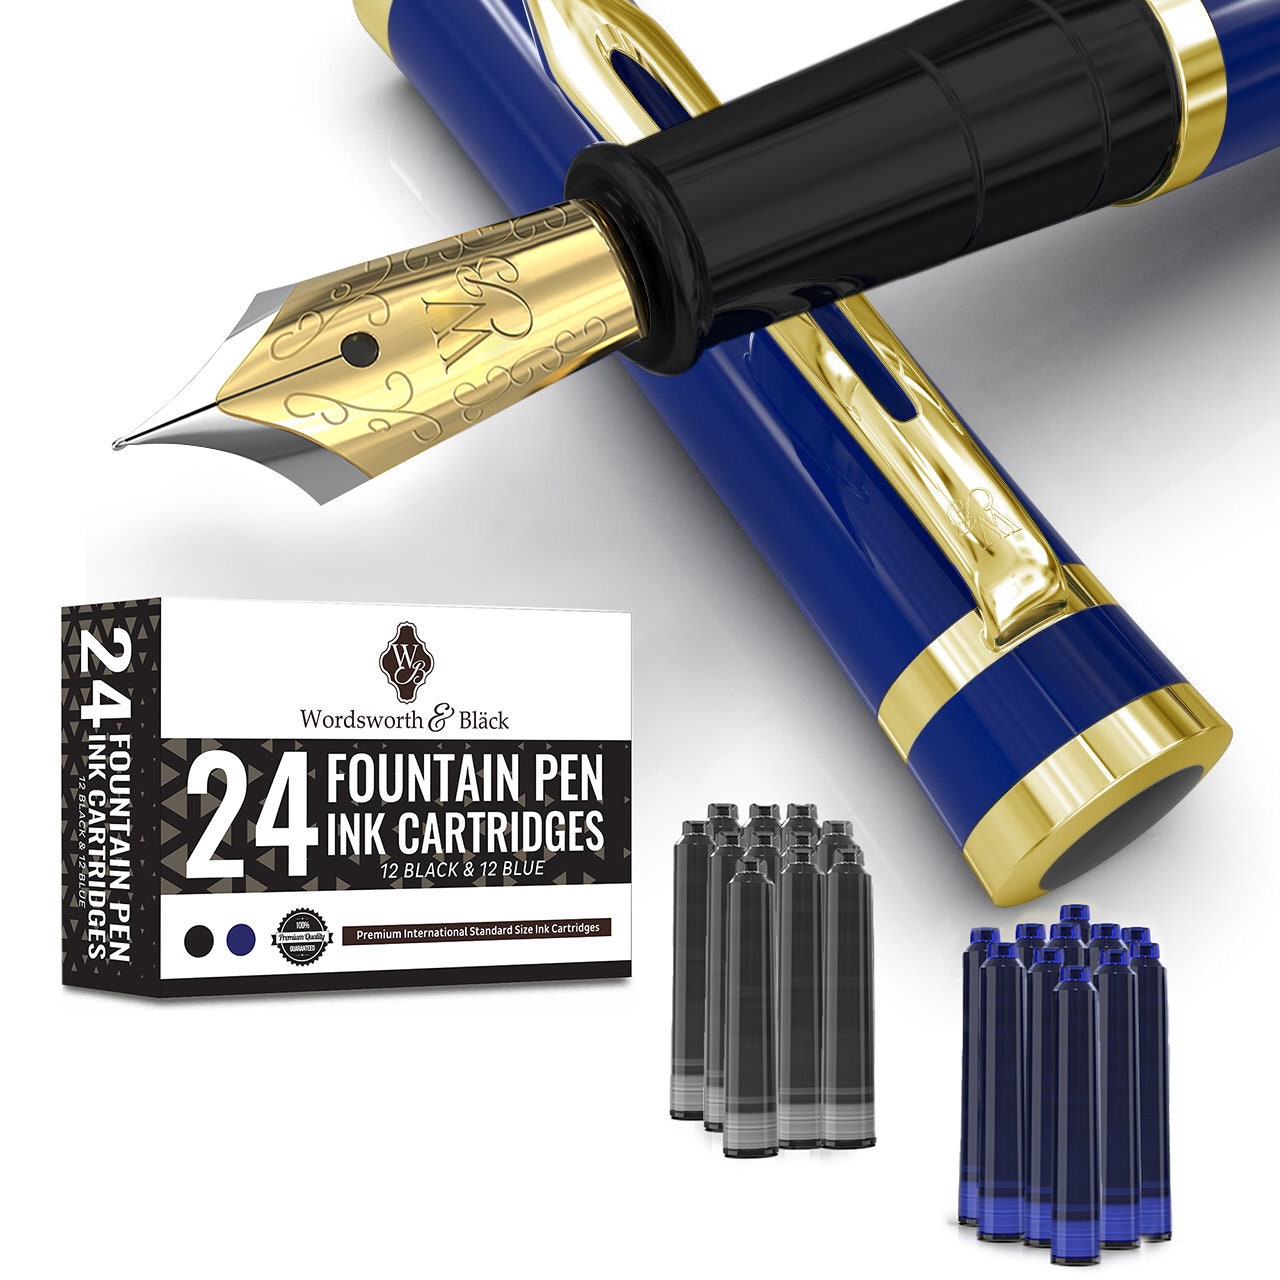 Premium Japanese Pens: What Is An Executive Pen And Which Should You  Choose?